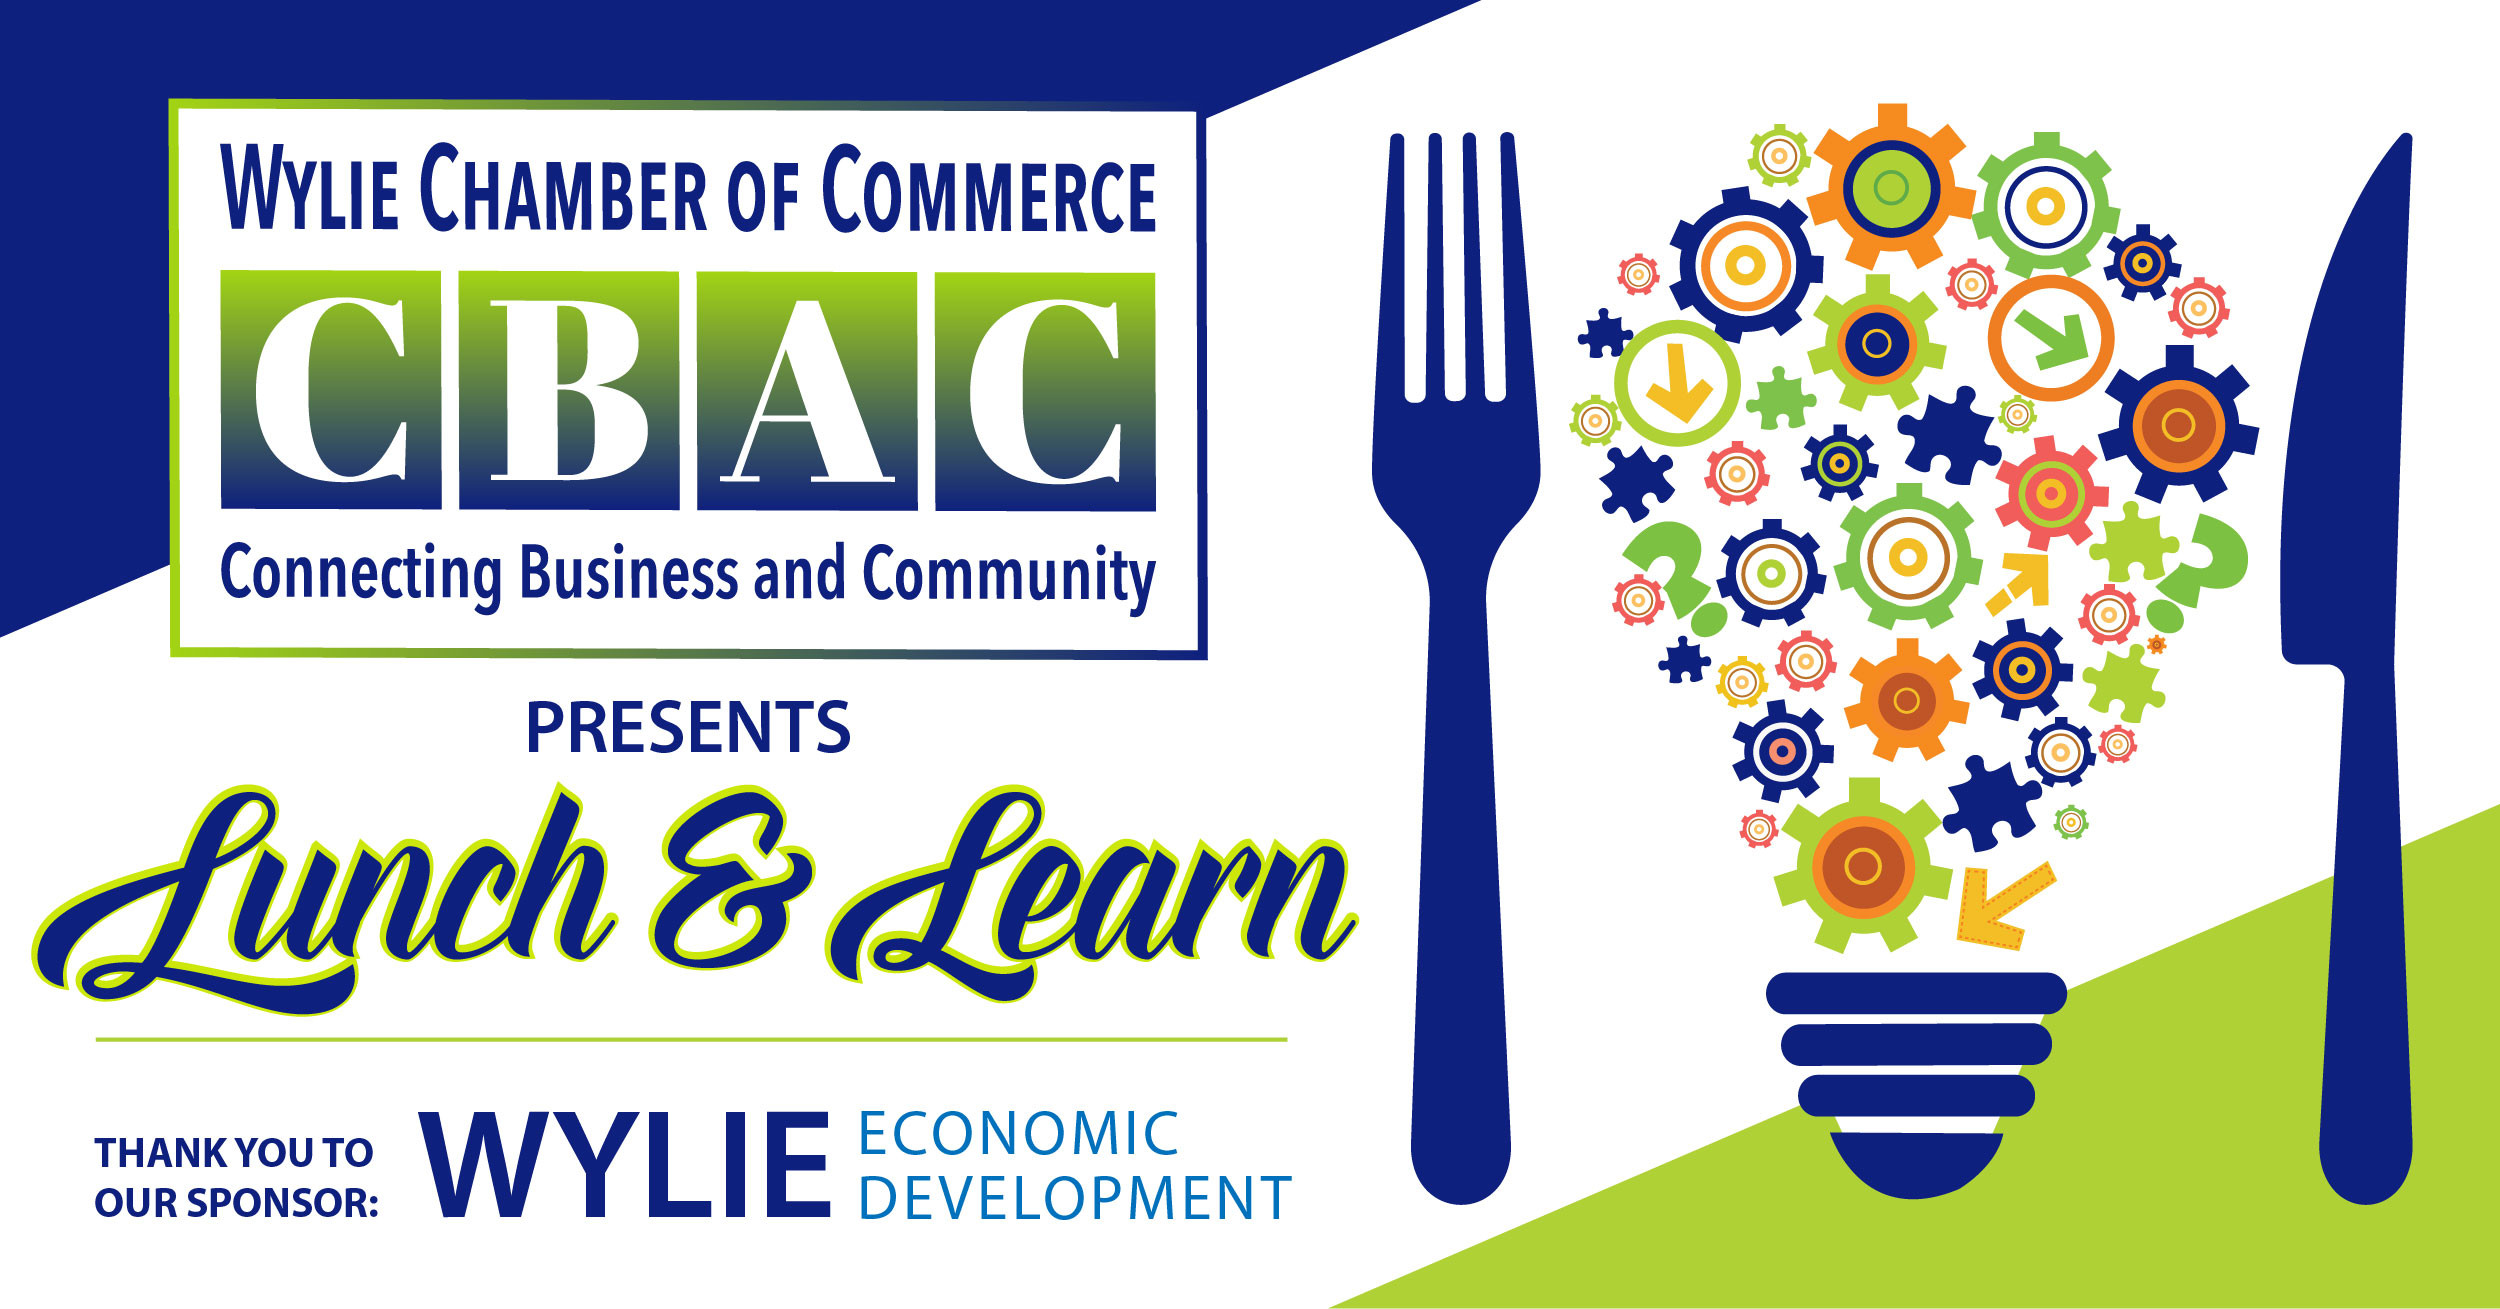 Chamber of Commerce Lunch and Learn image